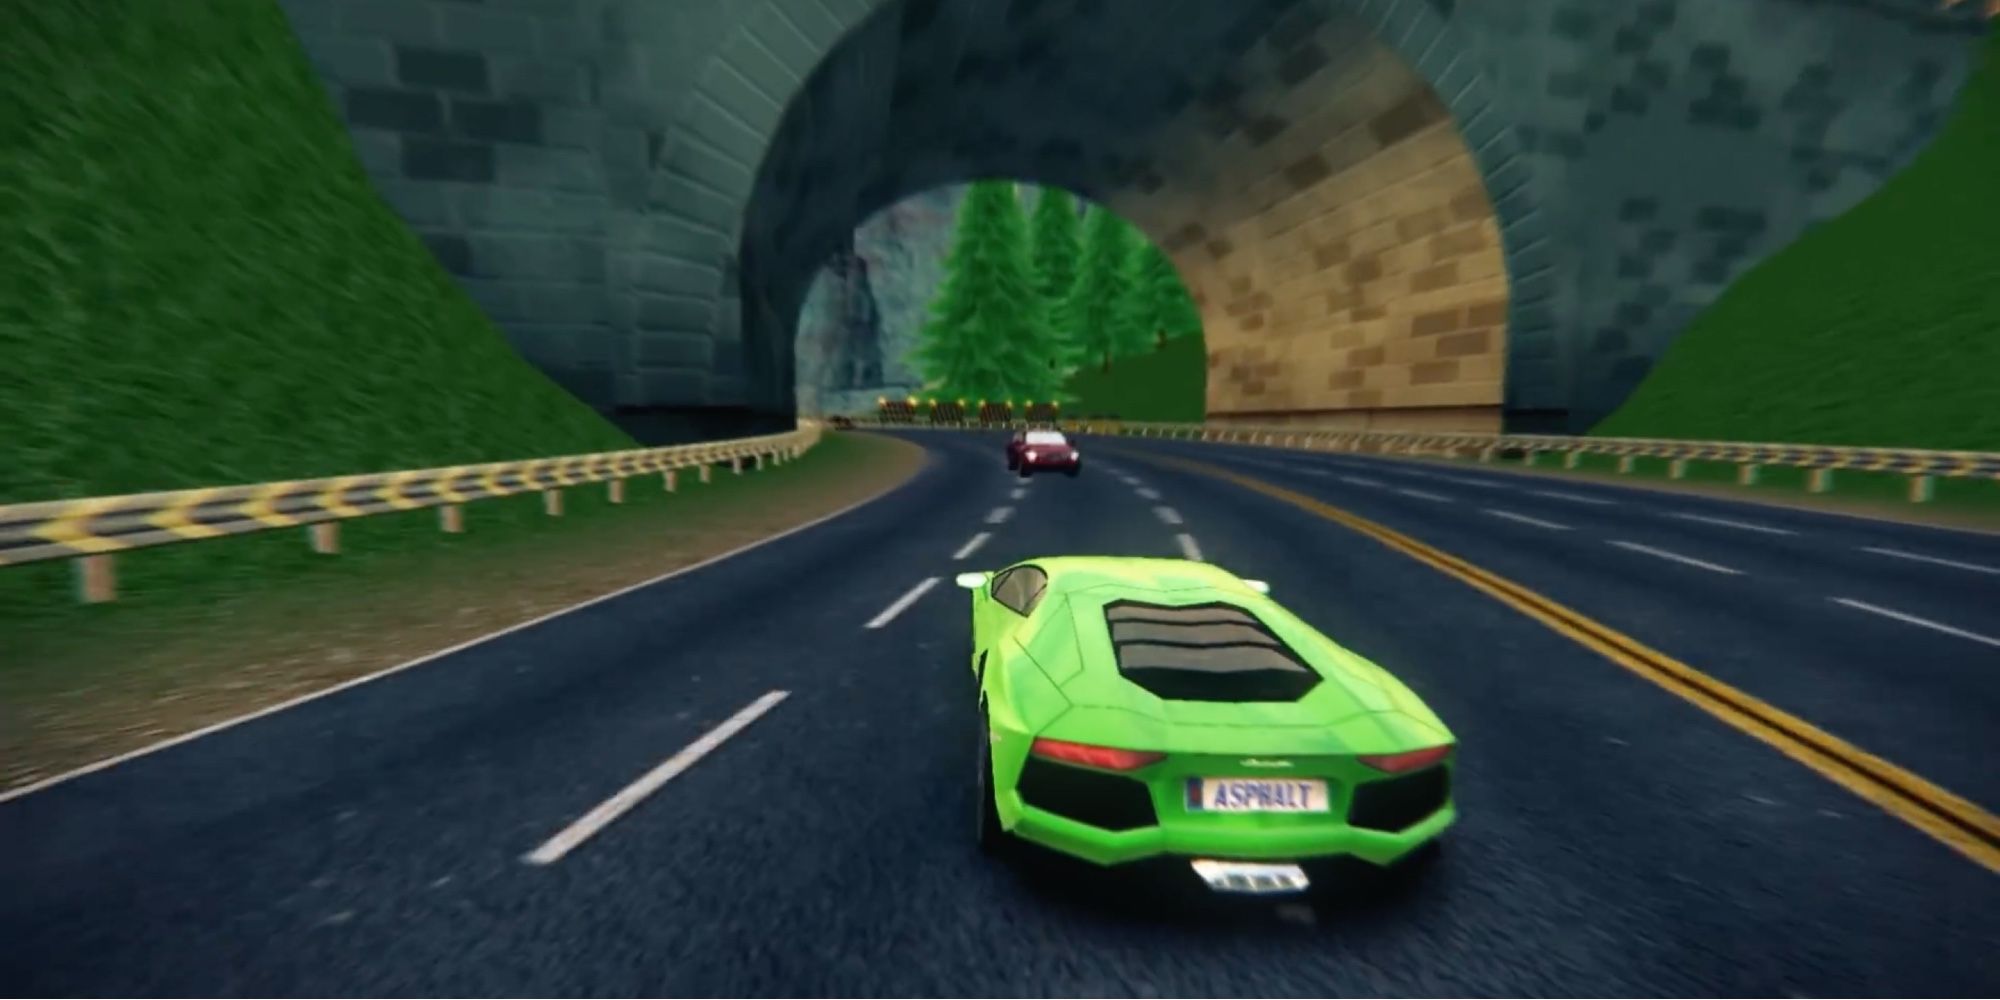 Mobile Racing Games - Player drives through the streets